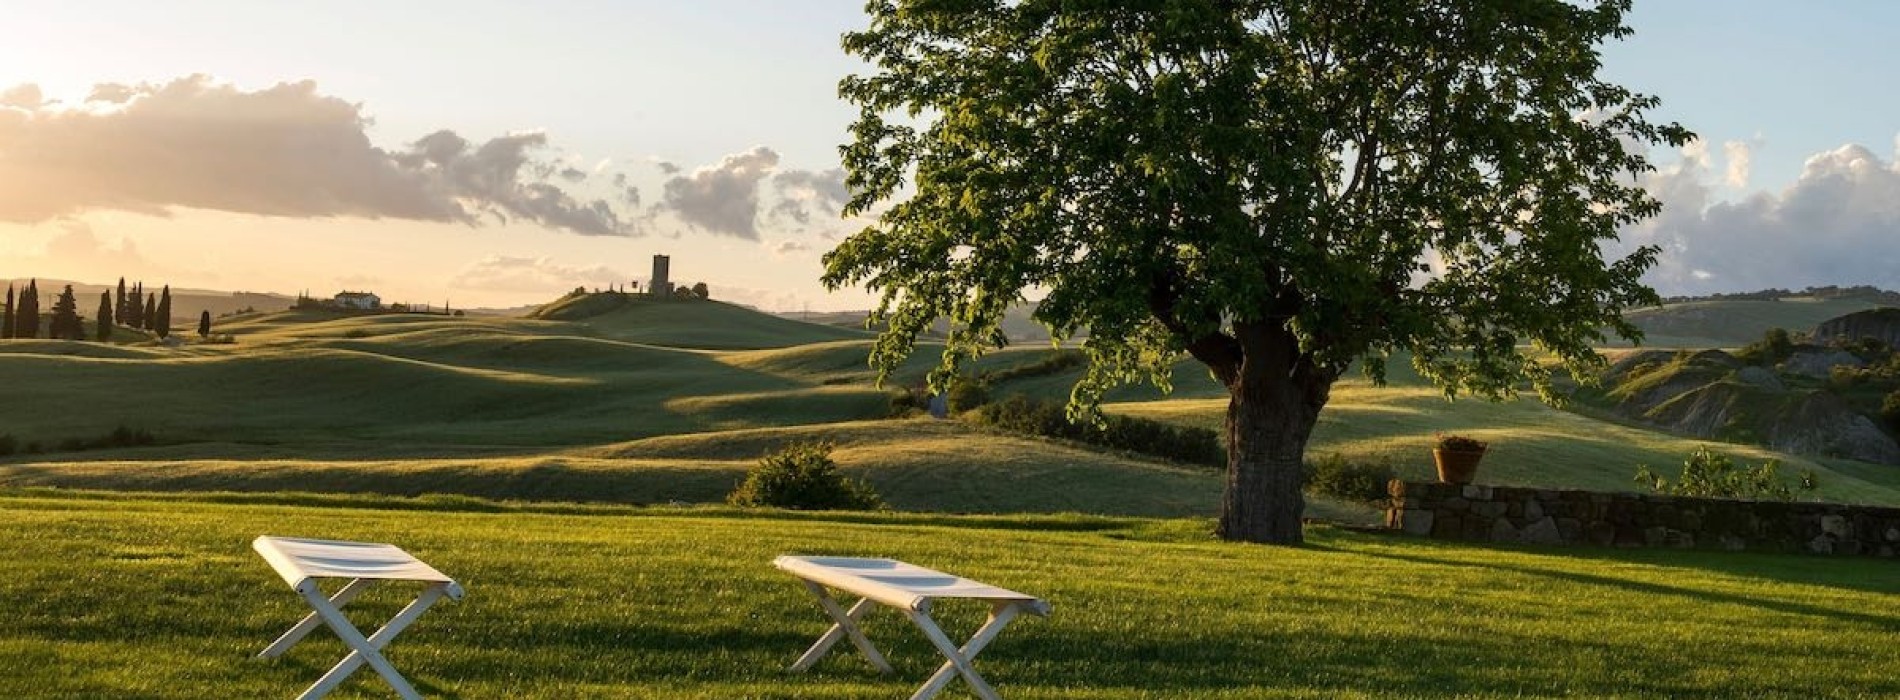 Bellorcia is situated in the famous Val d'Orcia